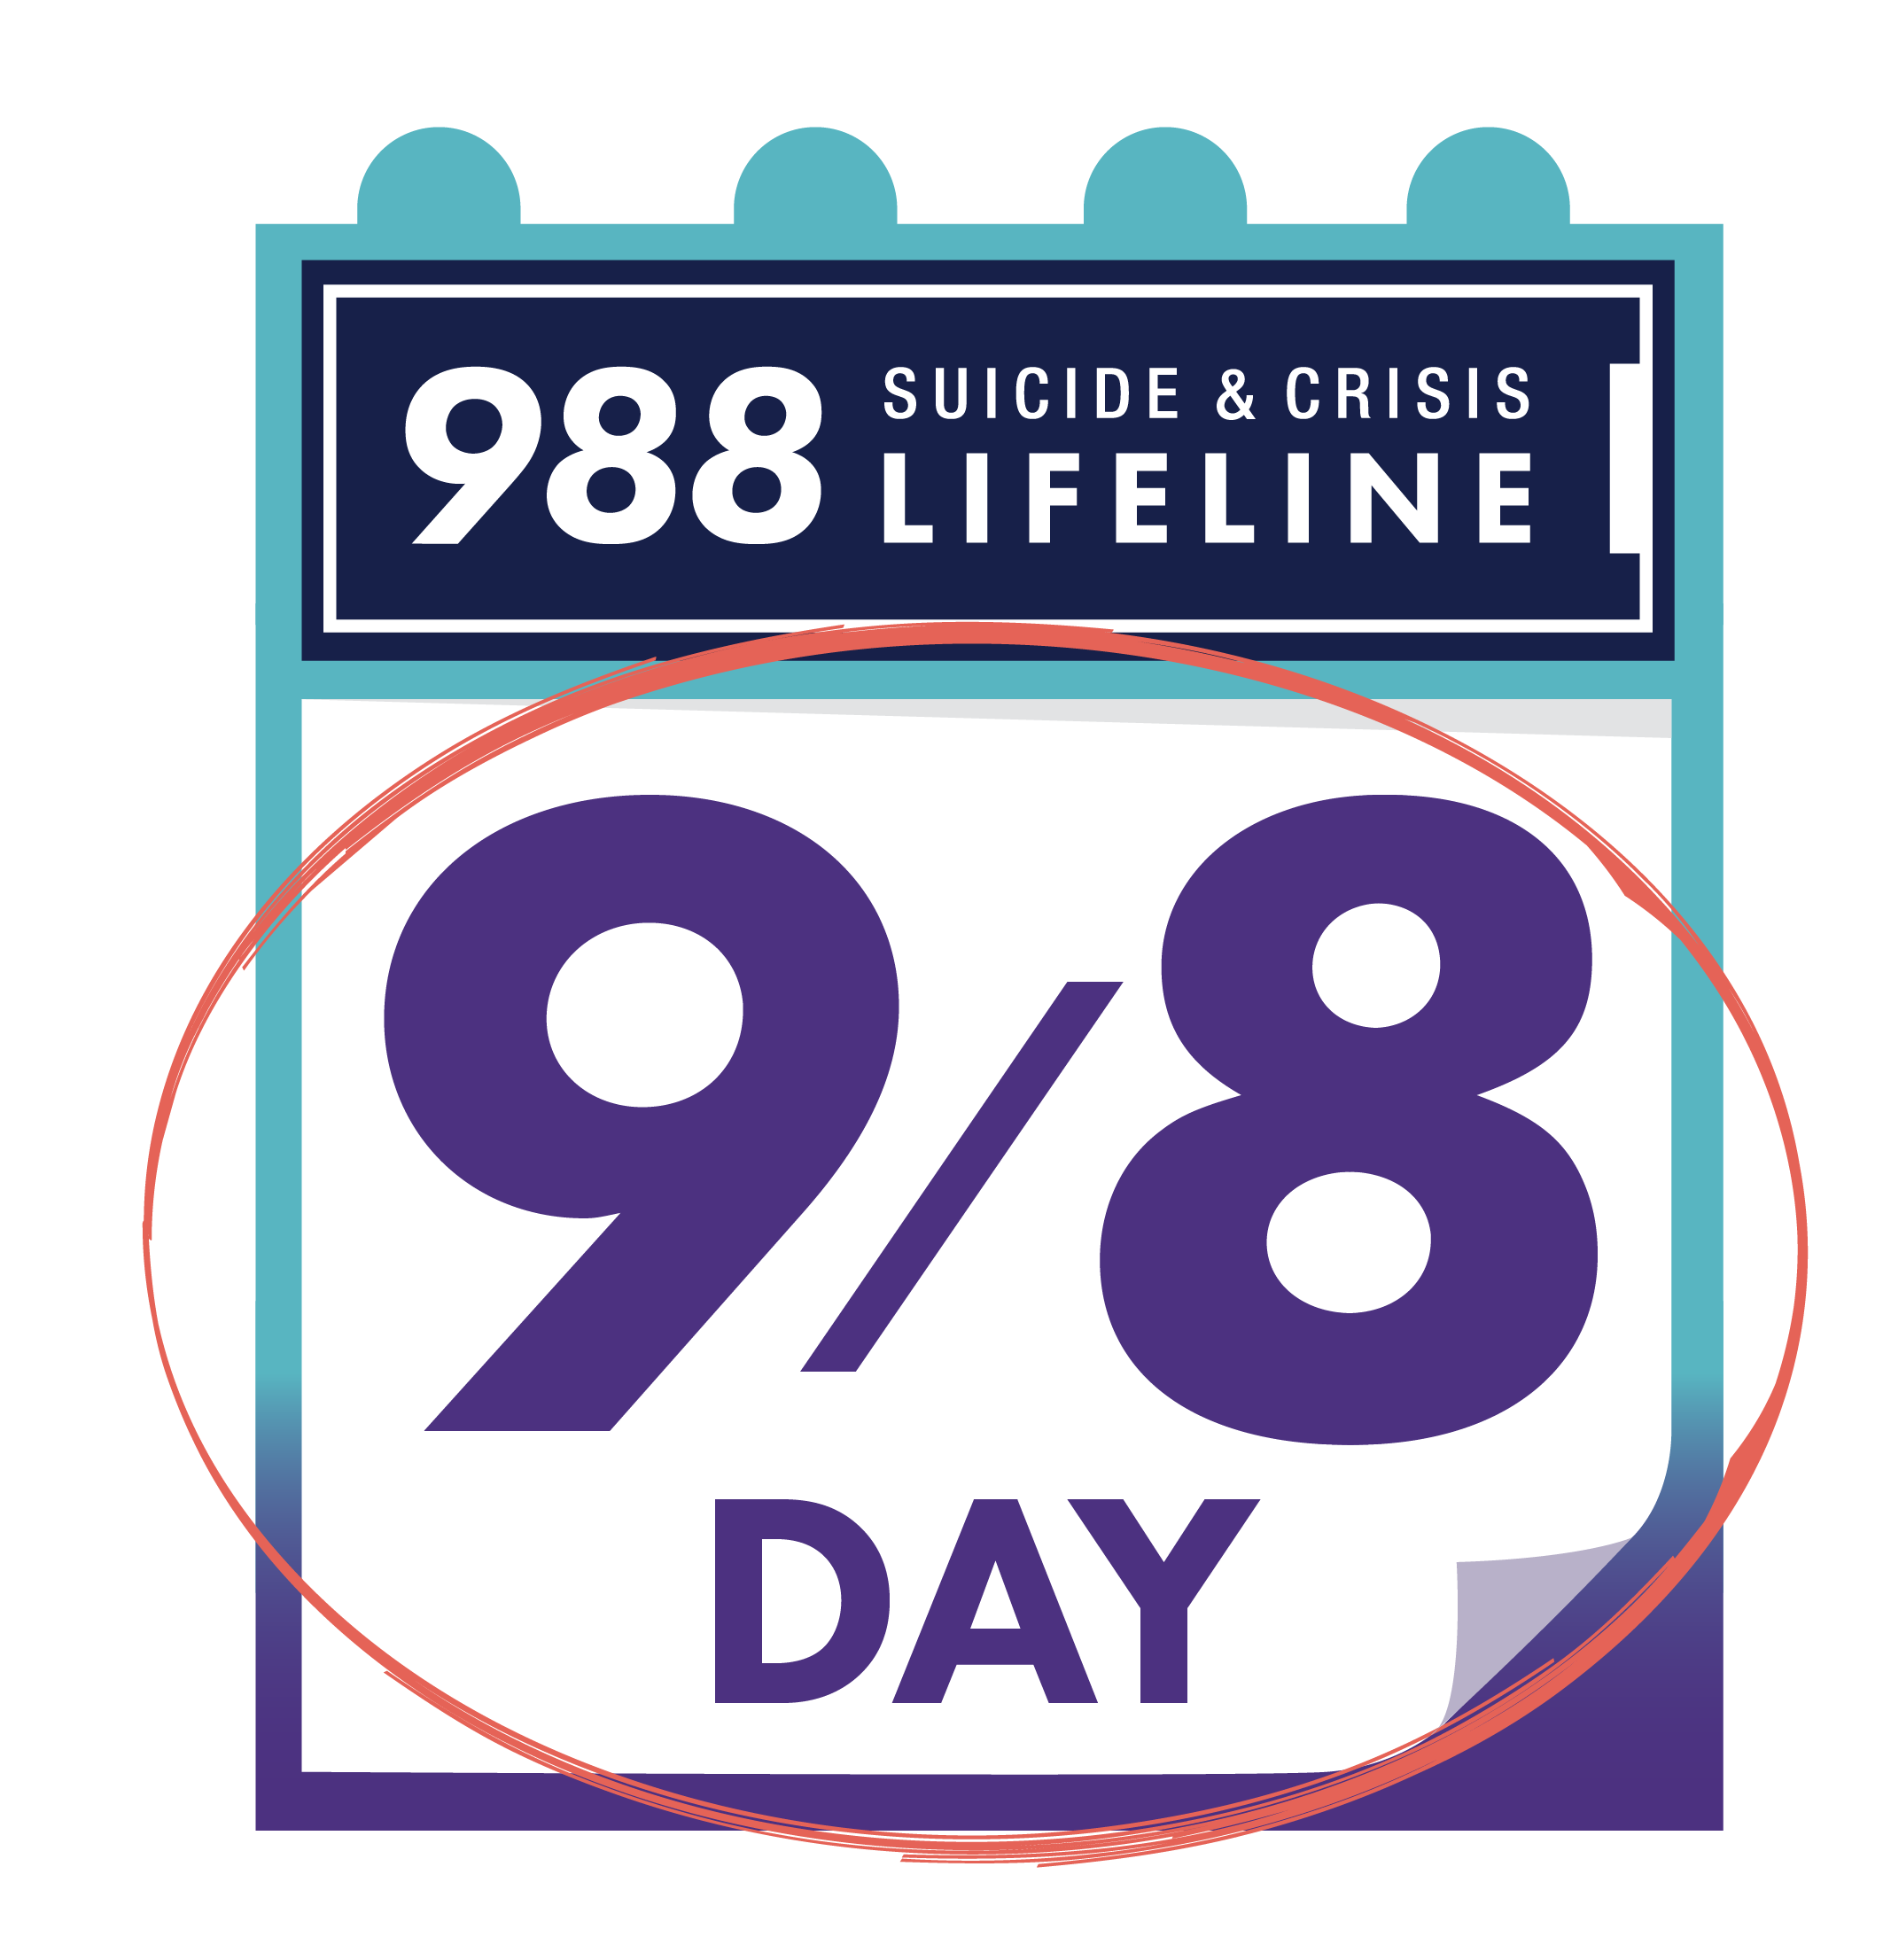 9/8 Day circled on calendar, with the 988 Suicide & Crisis Lifeline logo